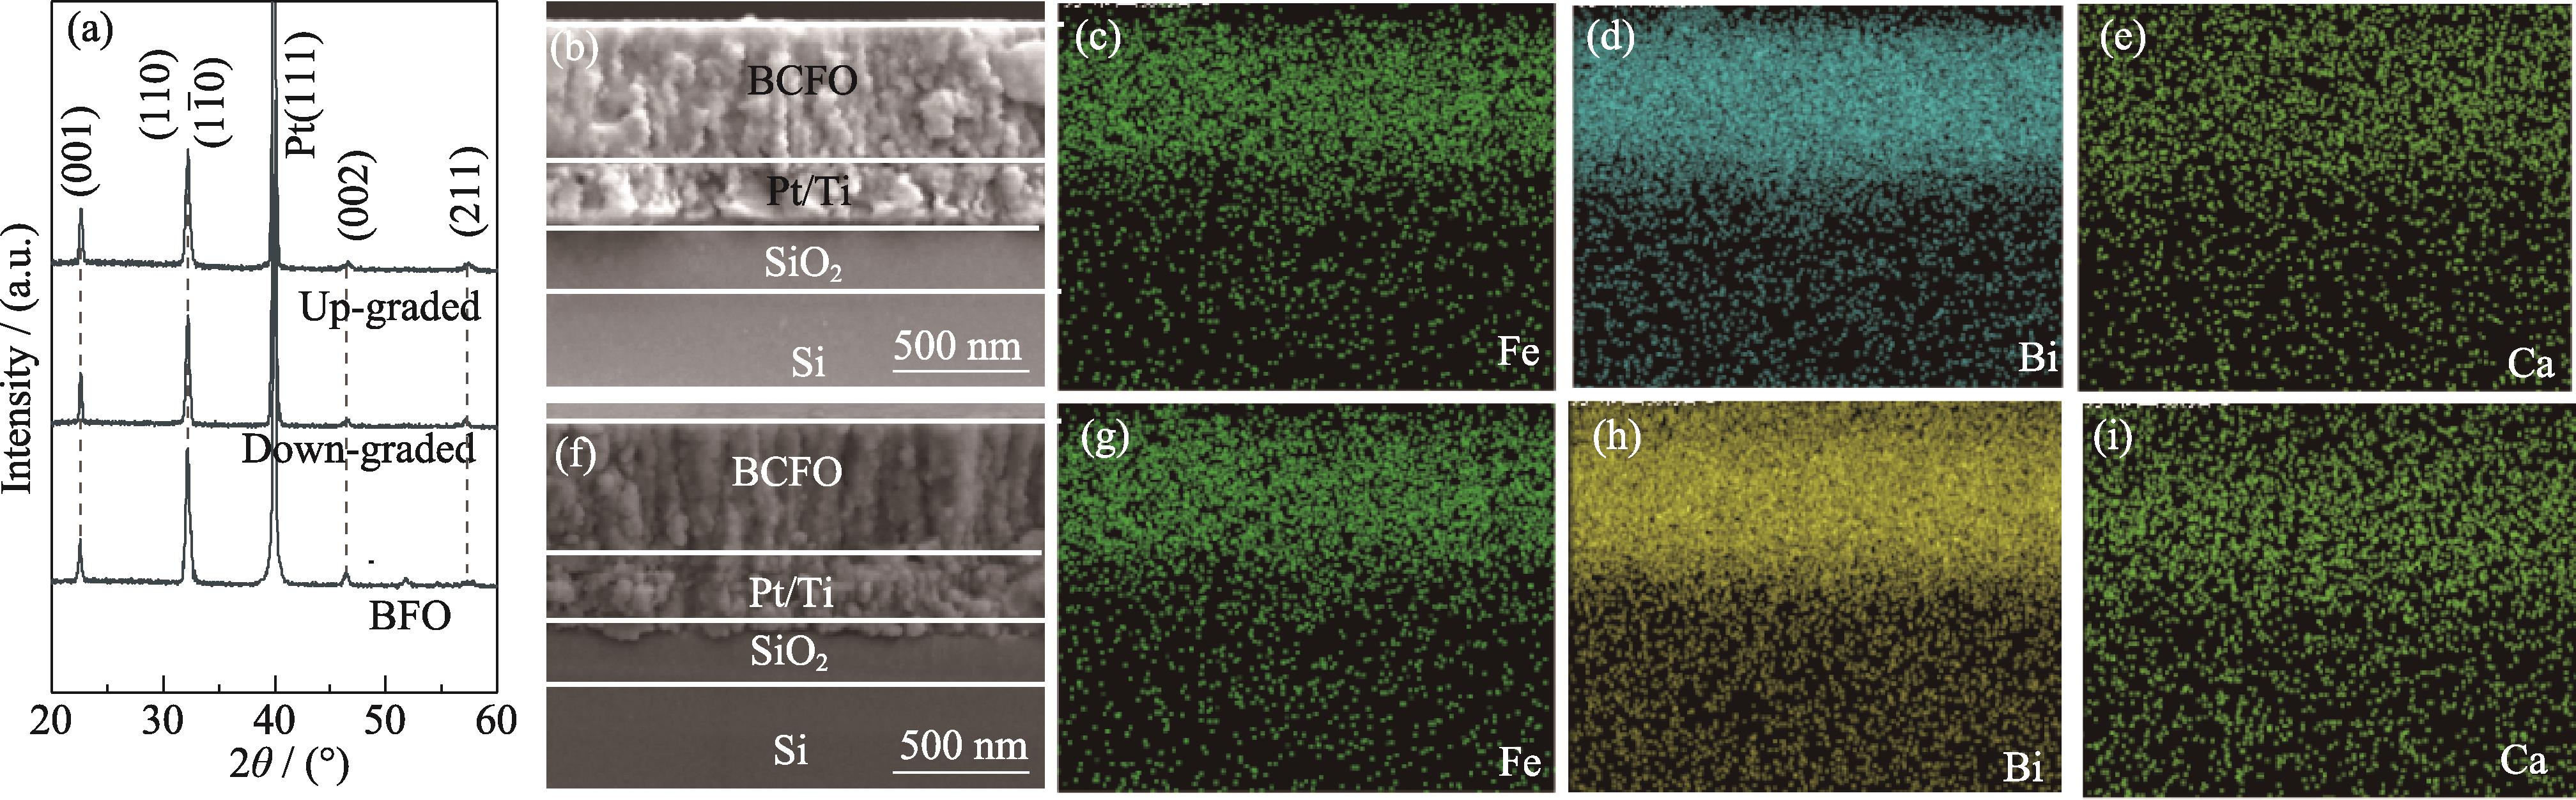 Structures and cross section morphologies of thin films(a) XRD patterns and SEM images of (b) up-graded films and (f) down-graded films. Bismuth, iron and calcium mappings of (c-e) up-graded BFO films and (g-i) down-graded BFO films